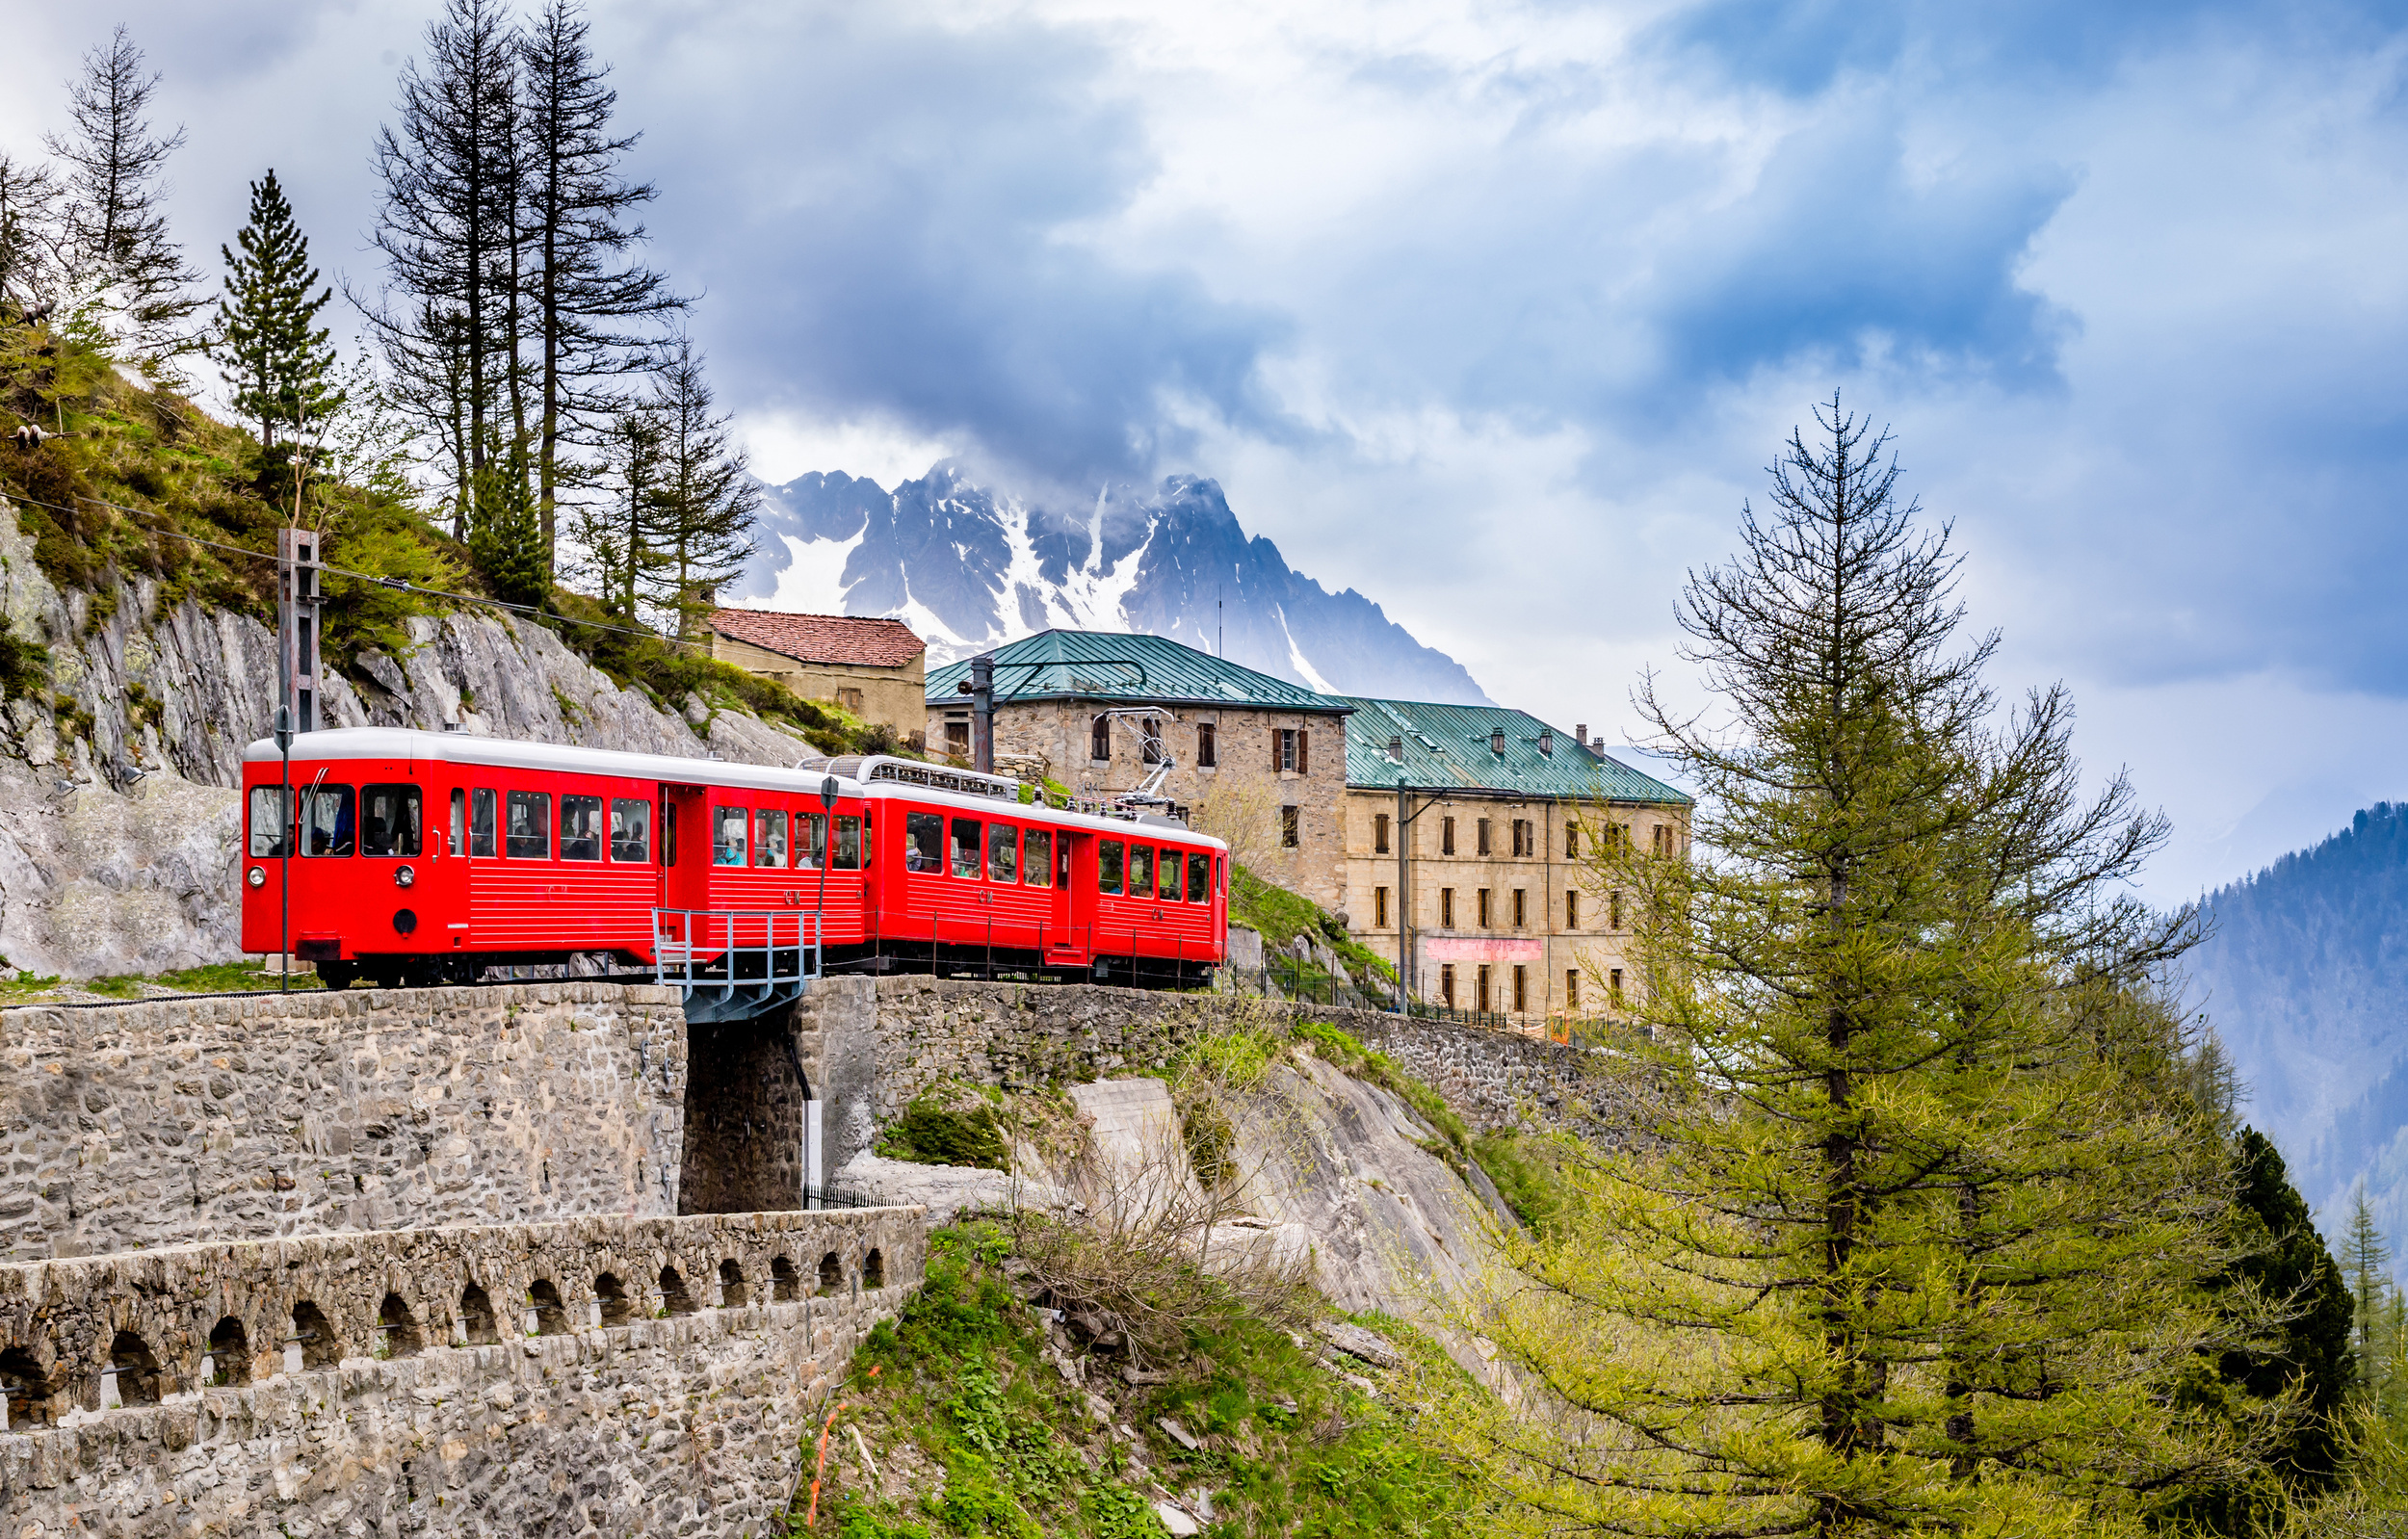 <p>Like its neighbor down south, the regional RER line through the French Alps is one of the best ways to see the mountains and villages. Relax in style and enjoy snowy peaks with a cup of hot chocolate aboard one of the many daily trains between alpine towns and cities.</p><p>You may also like: <a href='https://www.yardbarker.com/lifestyle/articles/15_weird_wonderful_roadside_attractions_in_the_united_states/s1__39002321'>15 weird & wonderful roadside attractions in the United States</a></p>